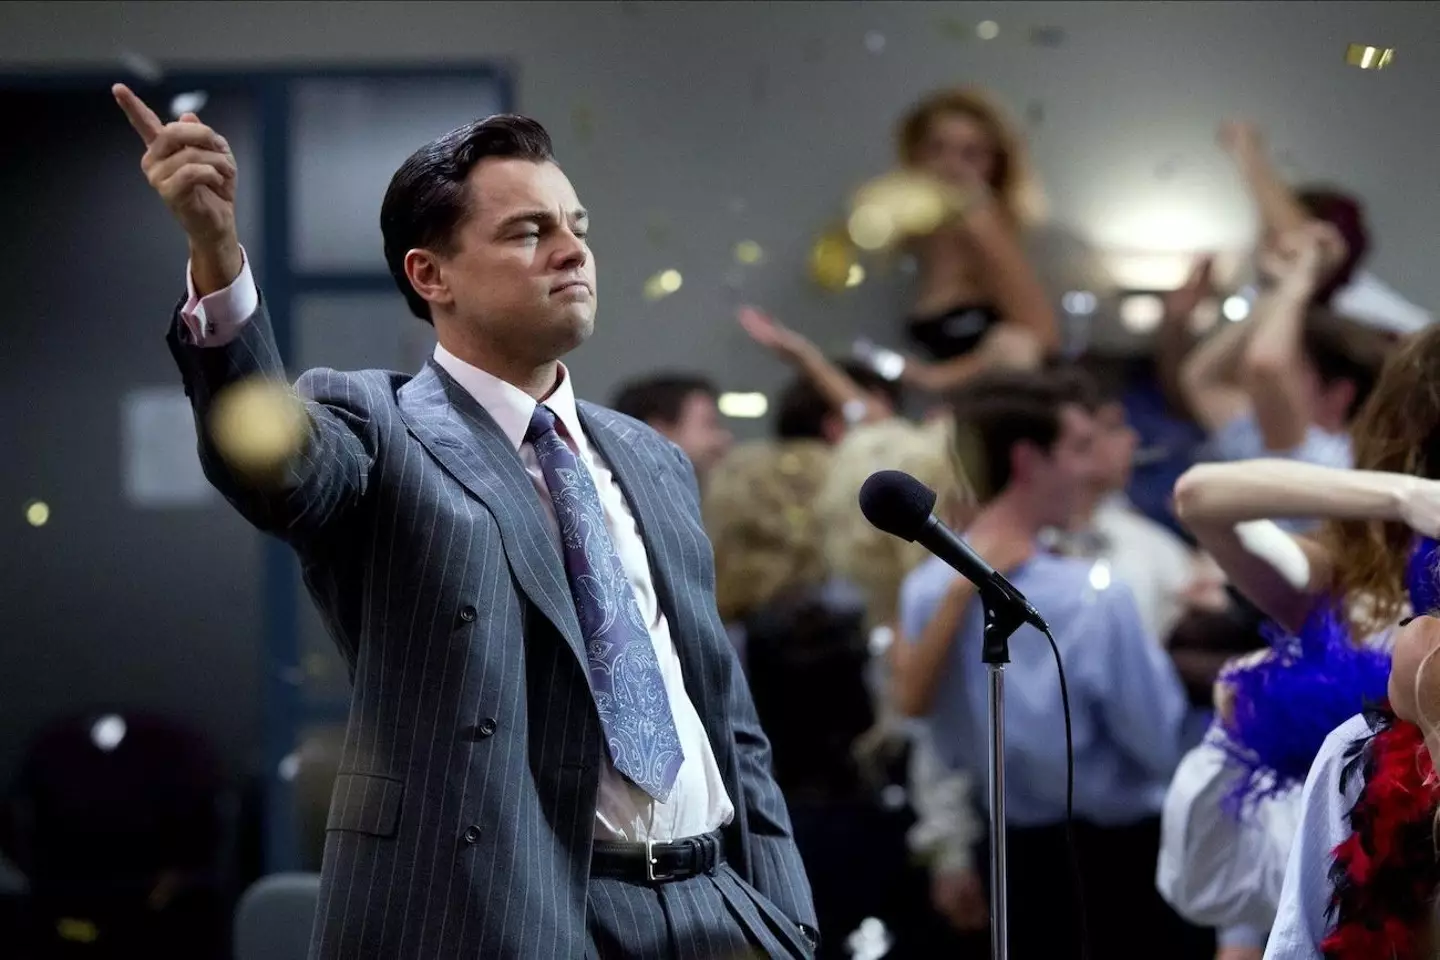 The Wolf Of Wall Street is 3 hours long, which is usually considered as pretty lengthy for normal movies.